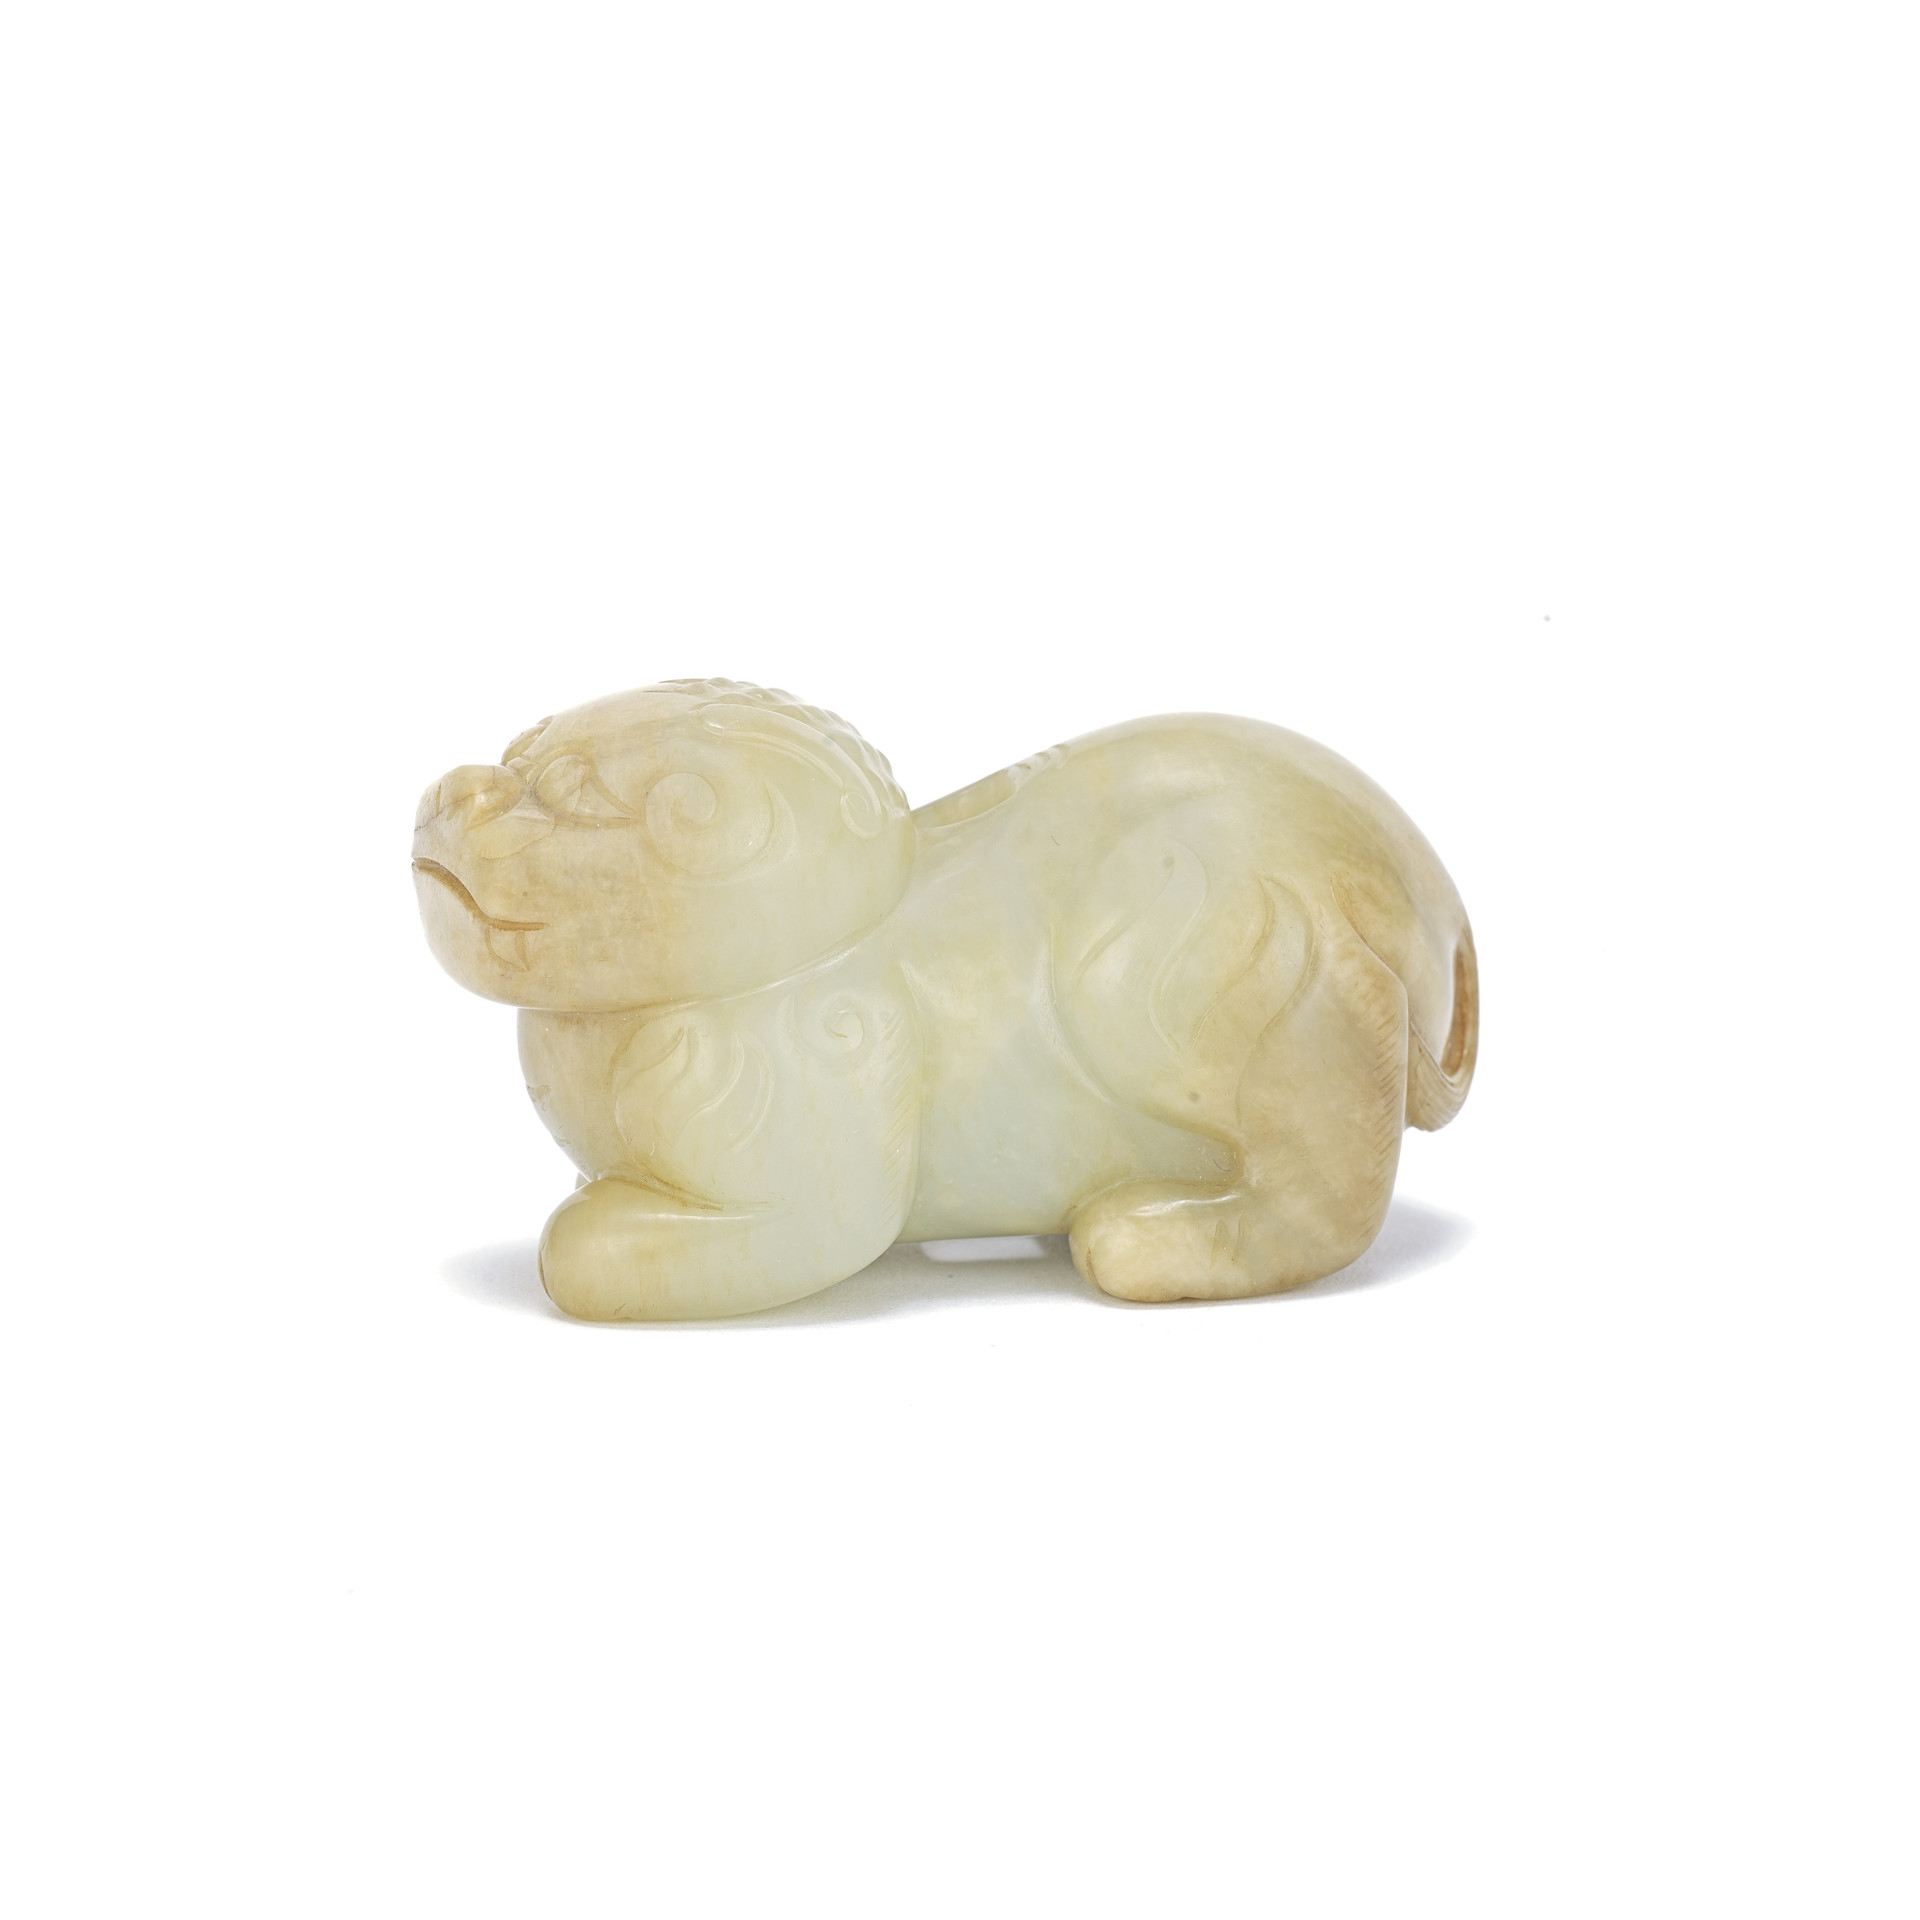 A creamy russet jade carving of a bixie, Yuan-early Ming Dynasty